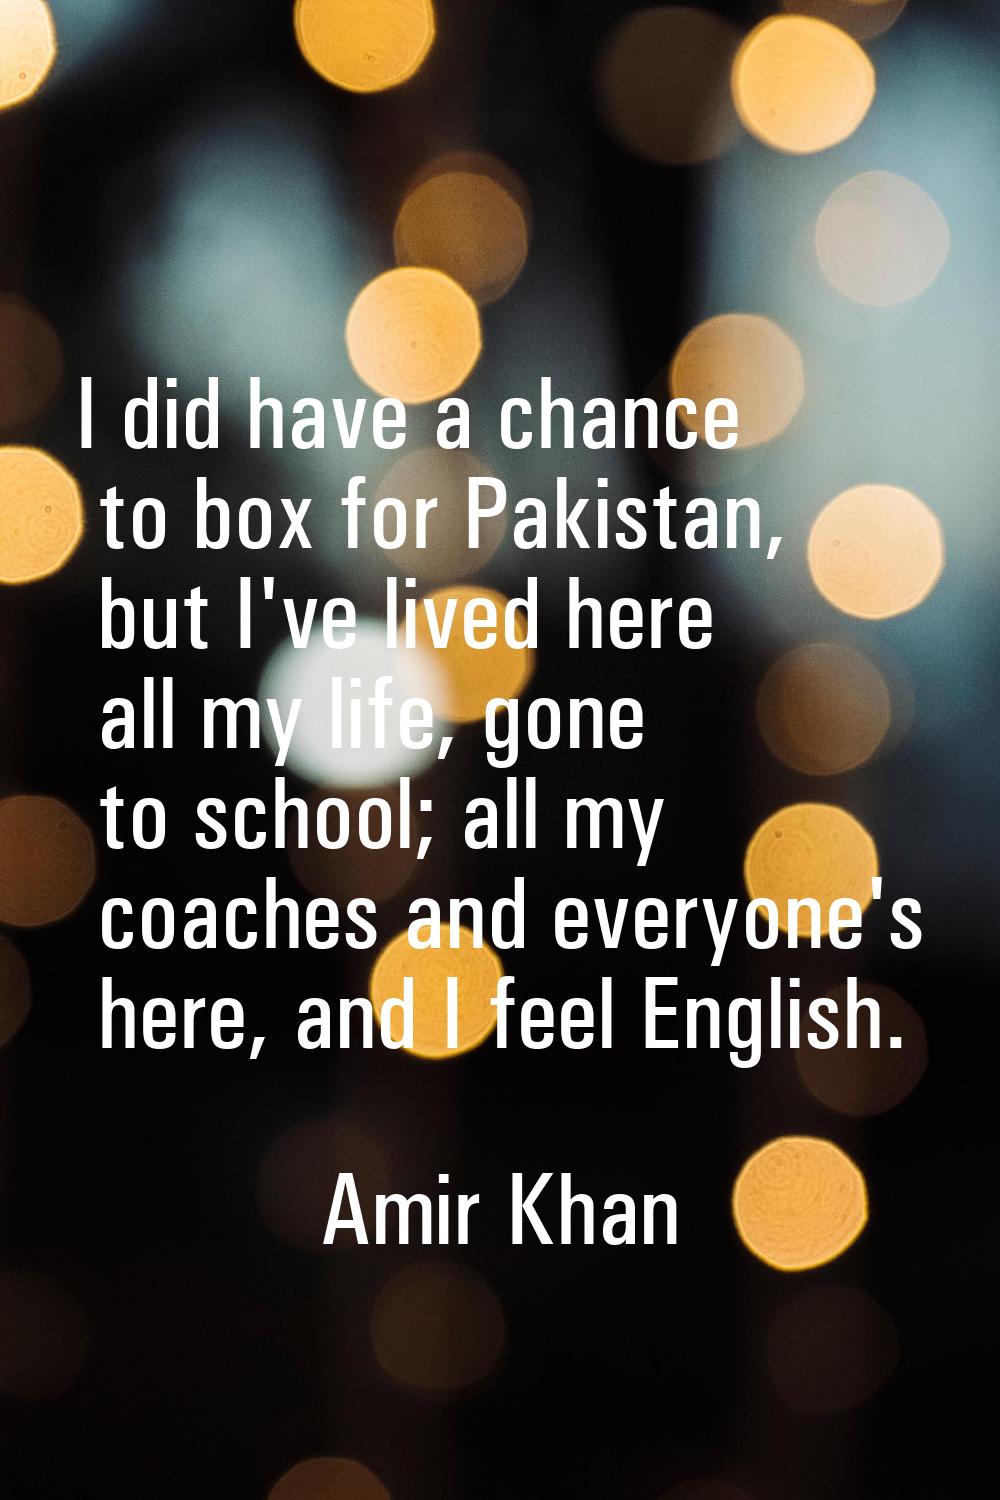 I did have a chance to box for Pakistan, but I've lived here all my life, gone to school; all my co